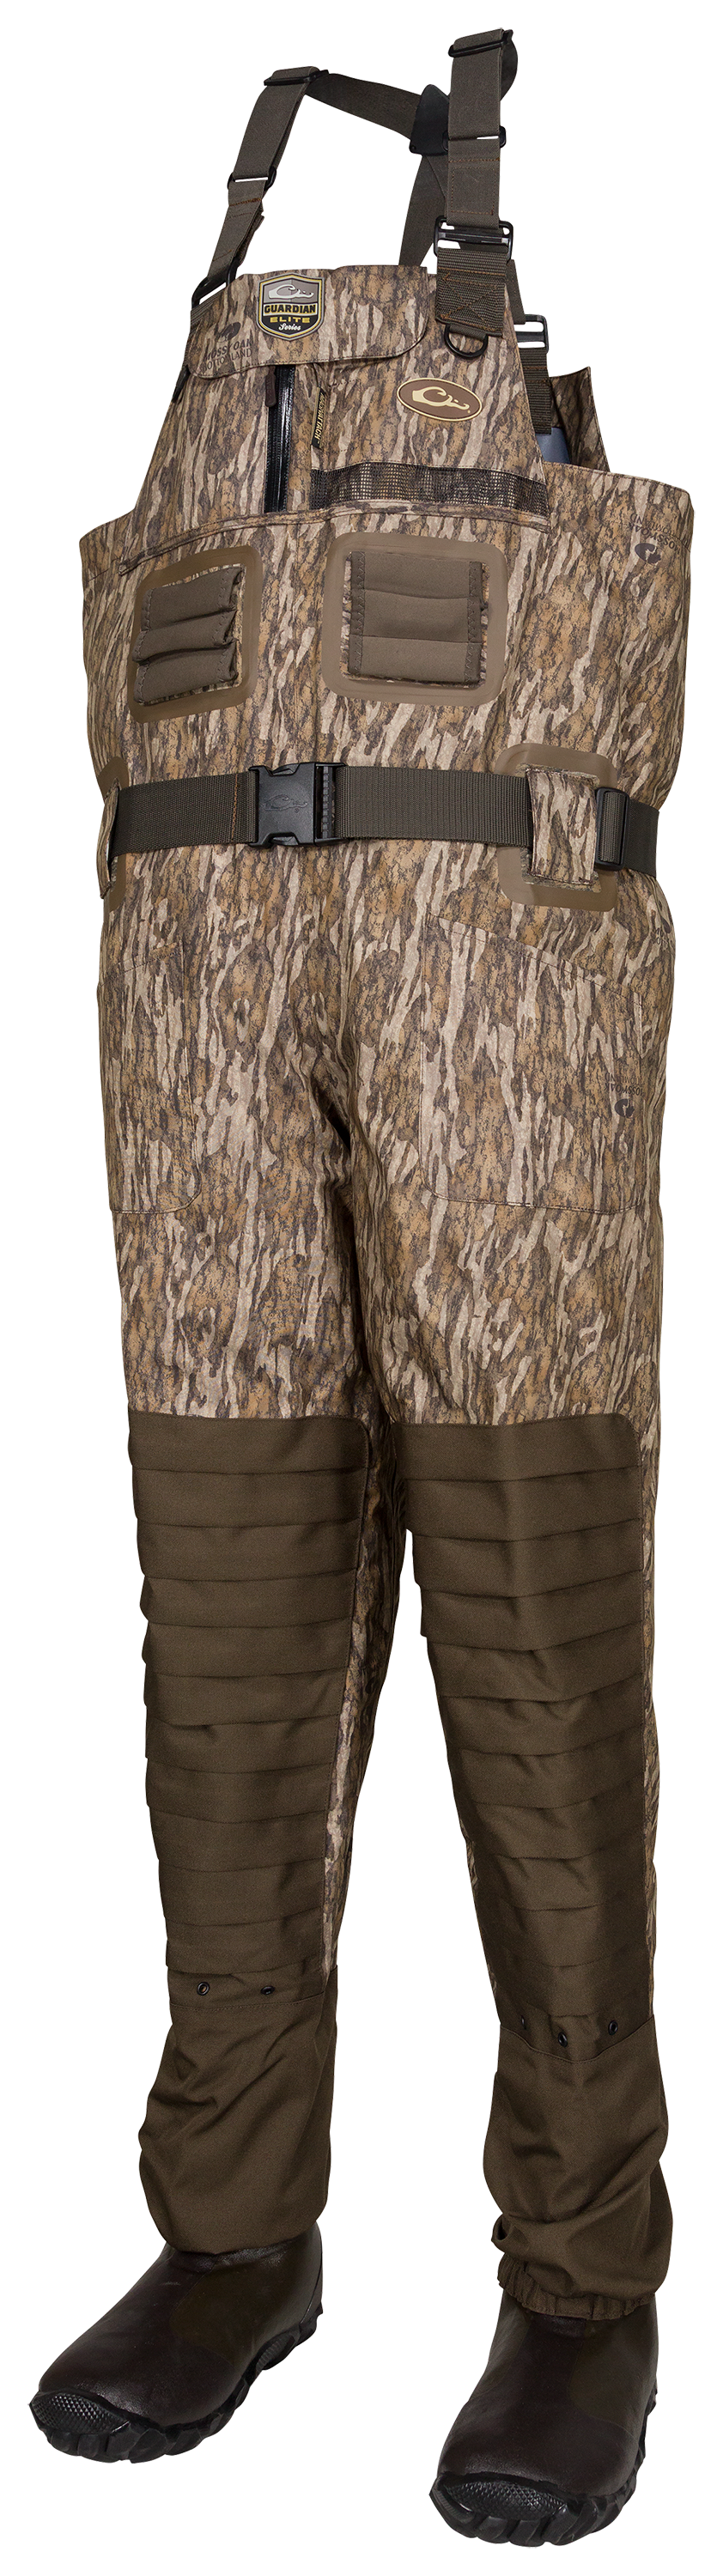 Drake Waterfowl Systems Guardian Elite Breathable Chest Waders for Men with  Tear-Away Insulated Liner